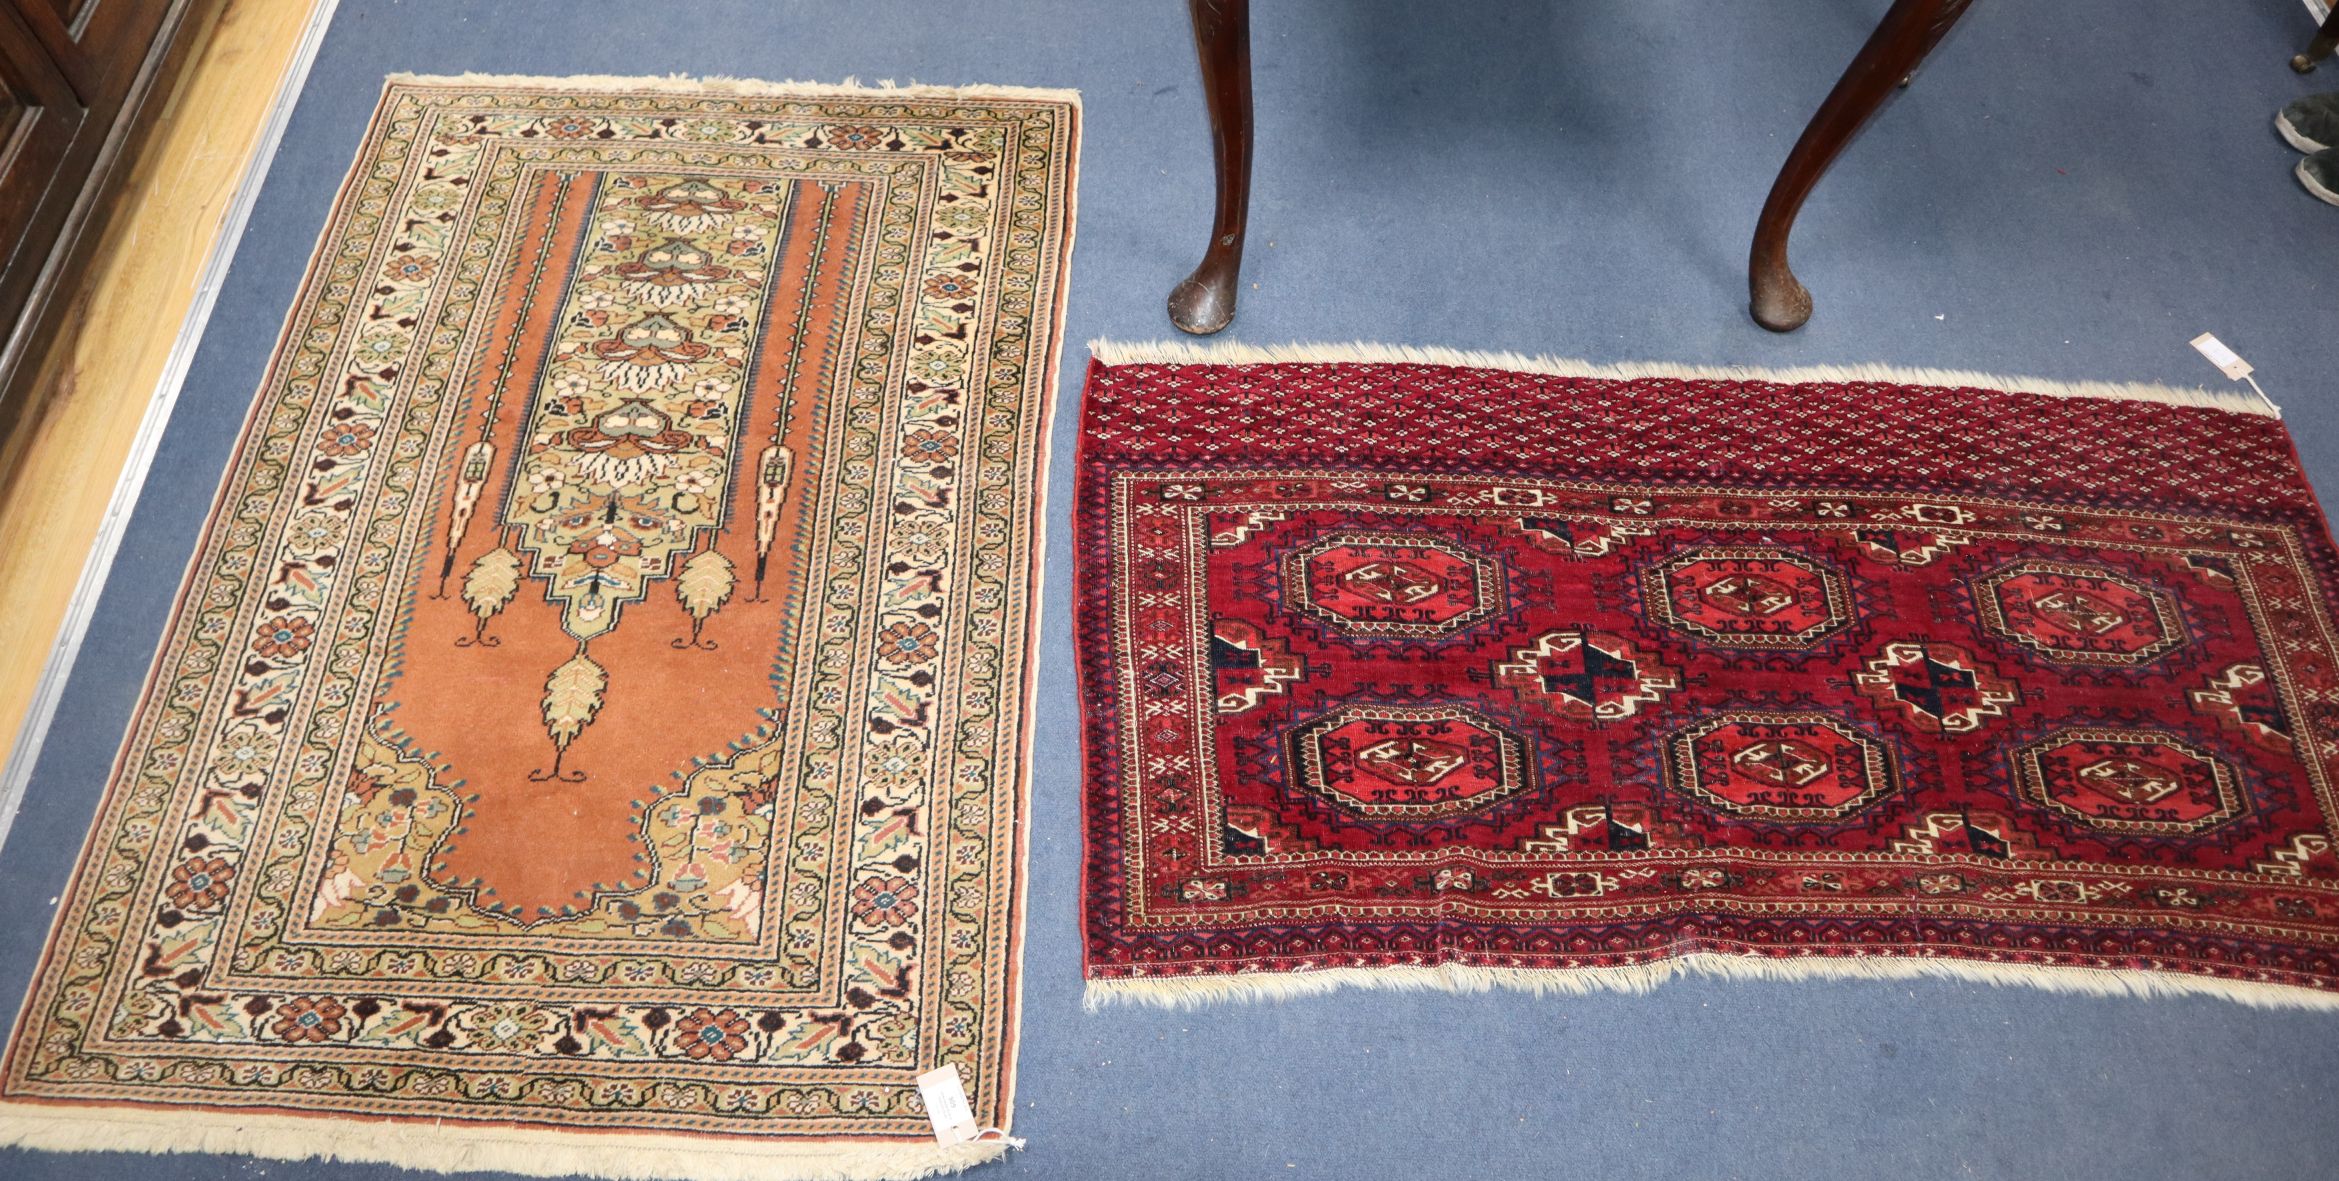 A Bokhara rug and a prayer rug Larger 132 x 94cm